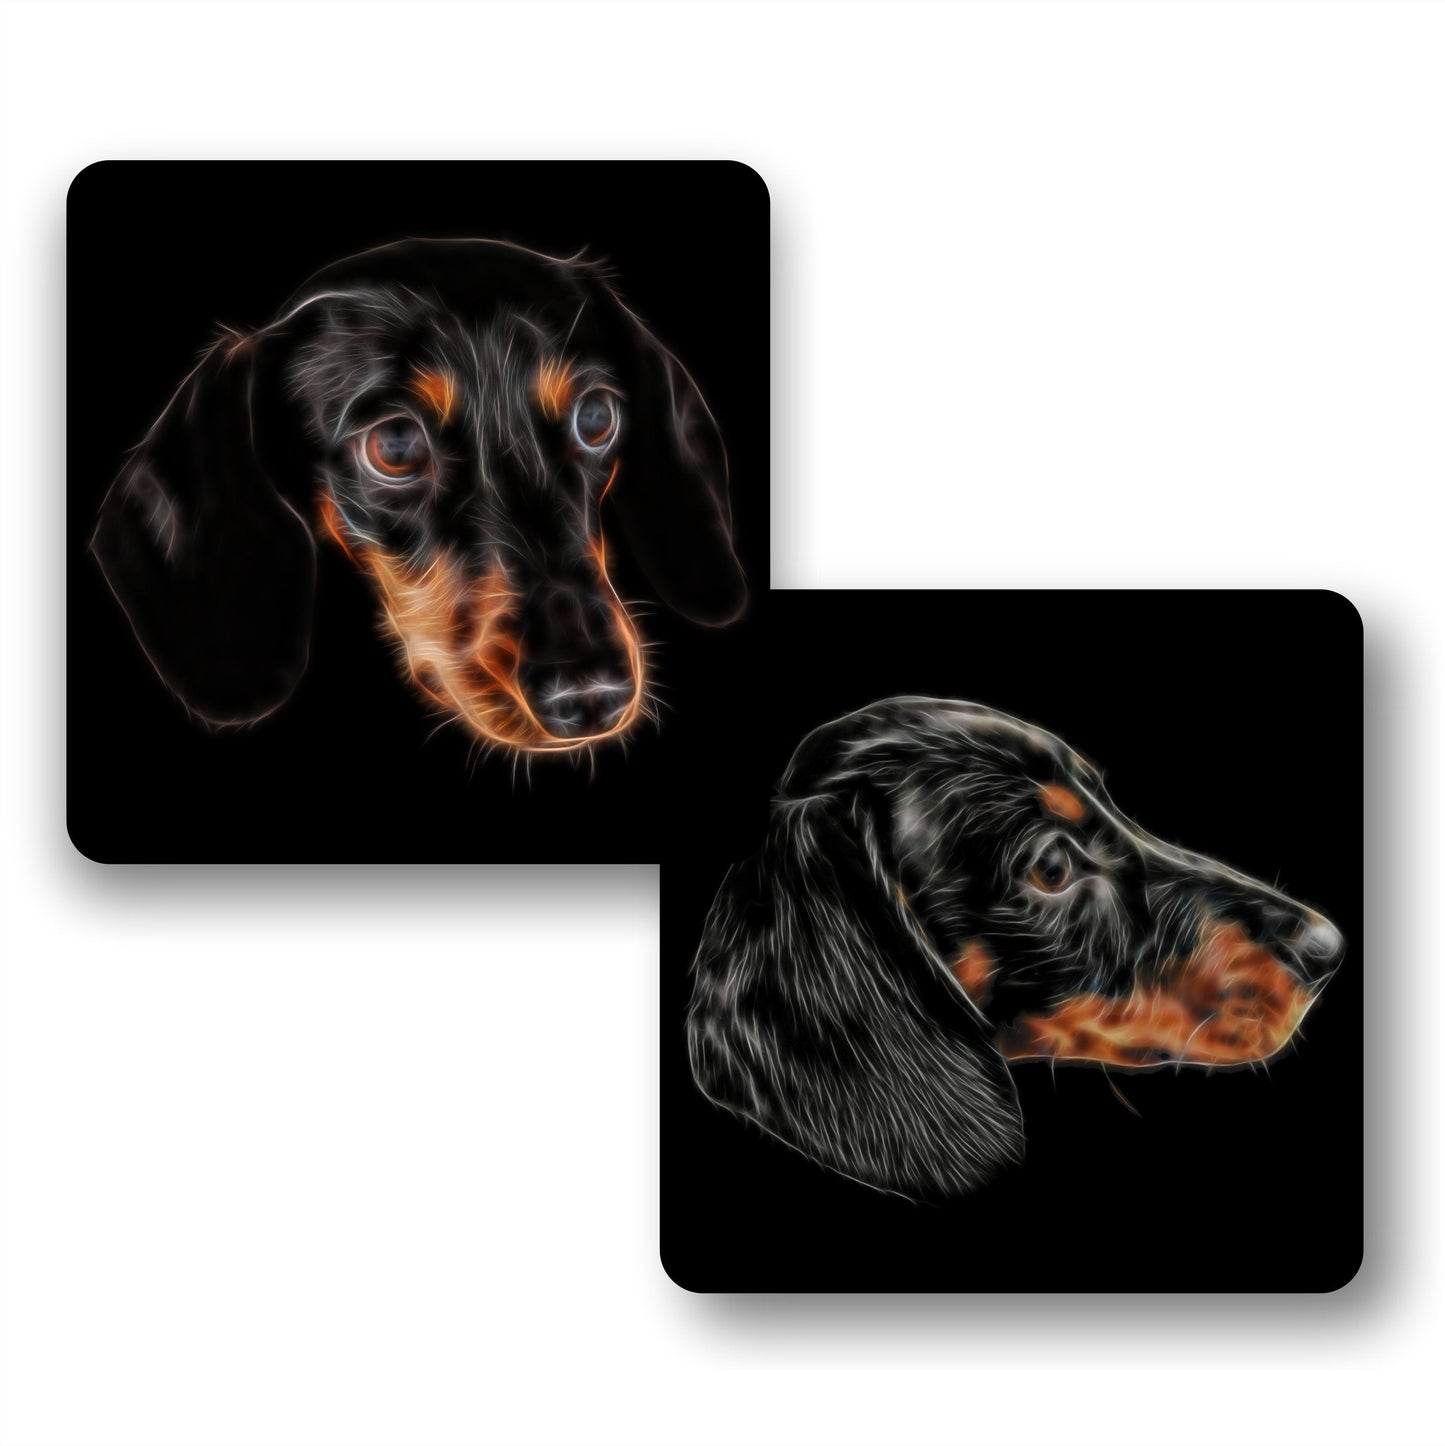 Black and Tan Dachshund Coasters, Set of 2, with Stunning Fractal Art Design